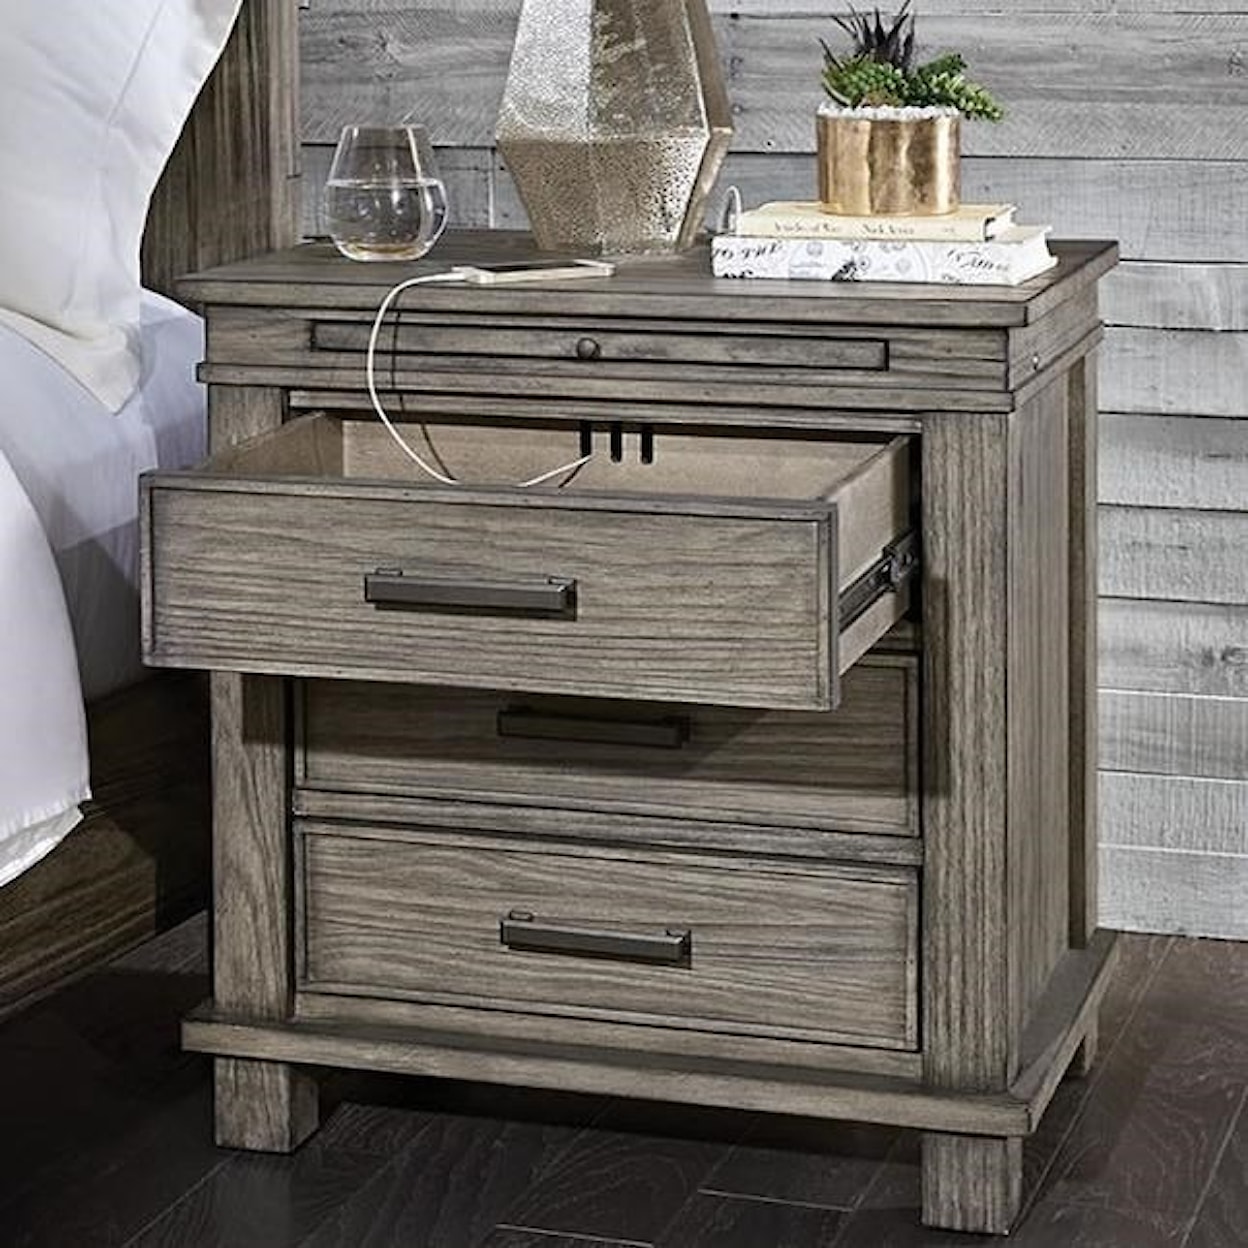 A-A Glacier Point Nightstand